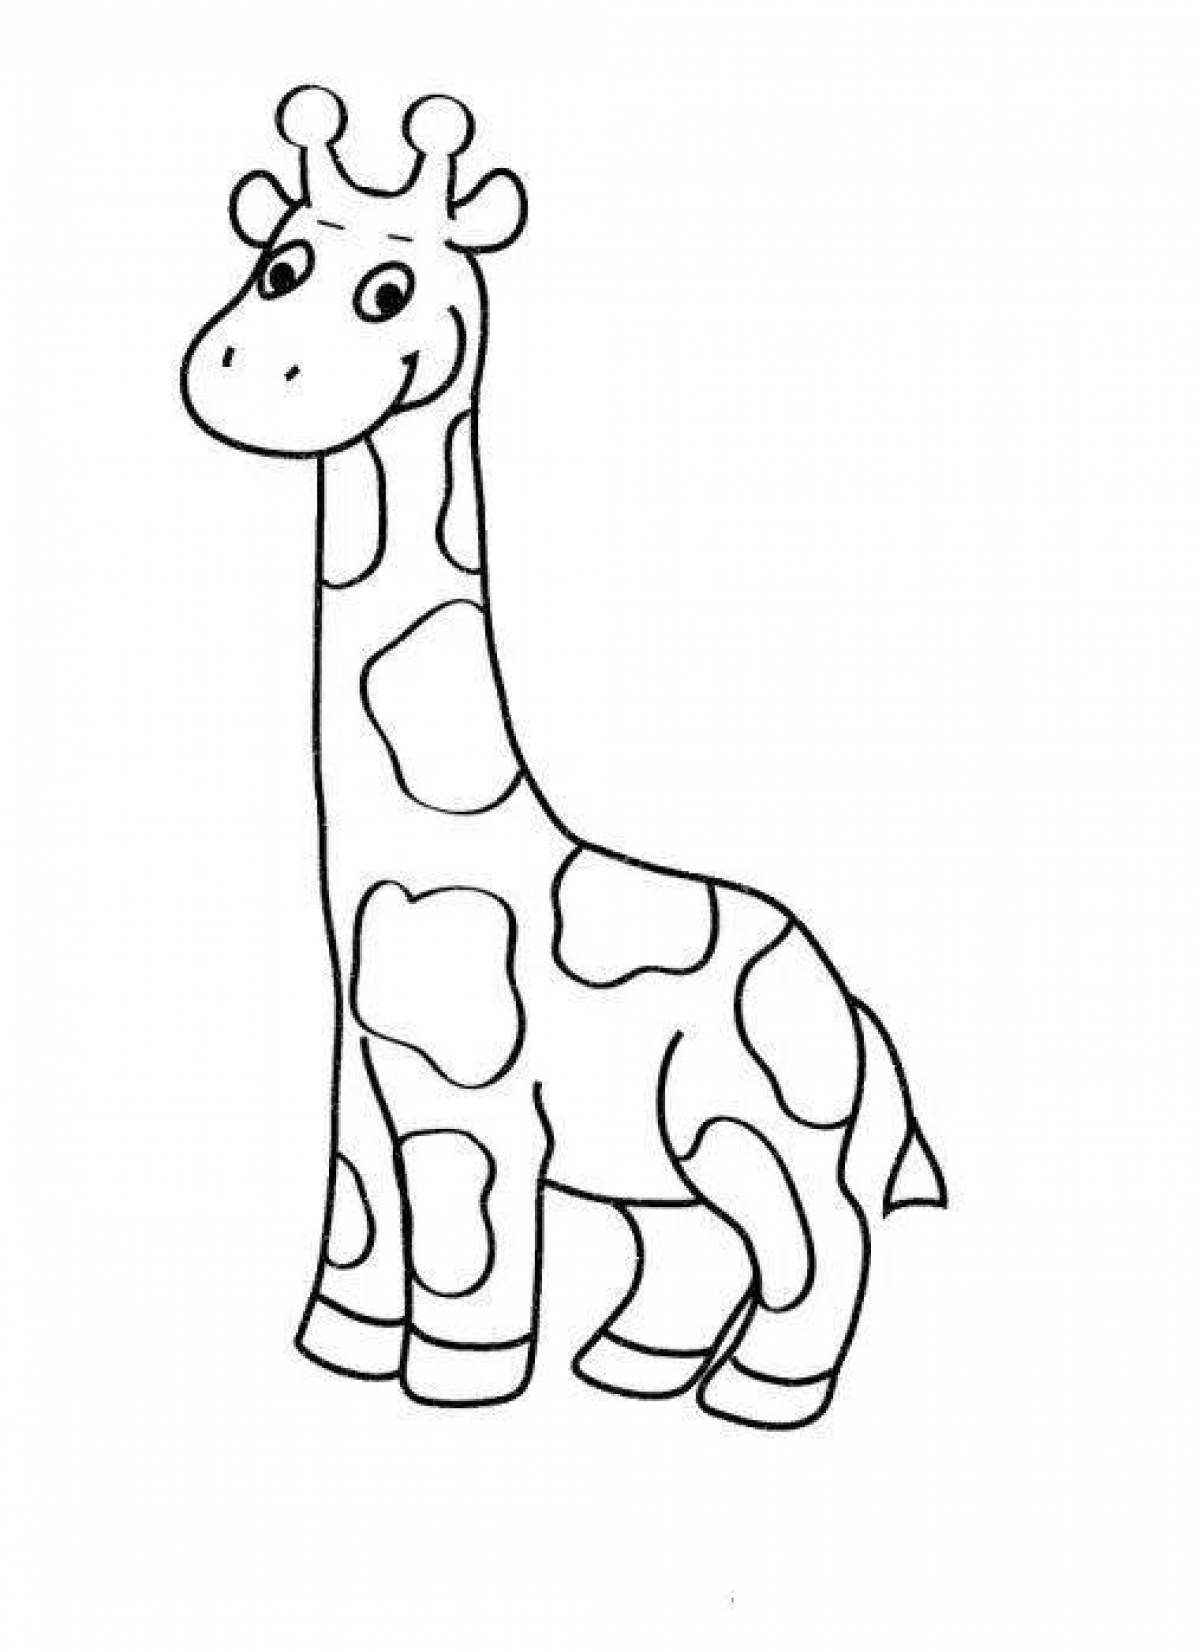 Animated giraffe coloring page